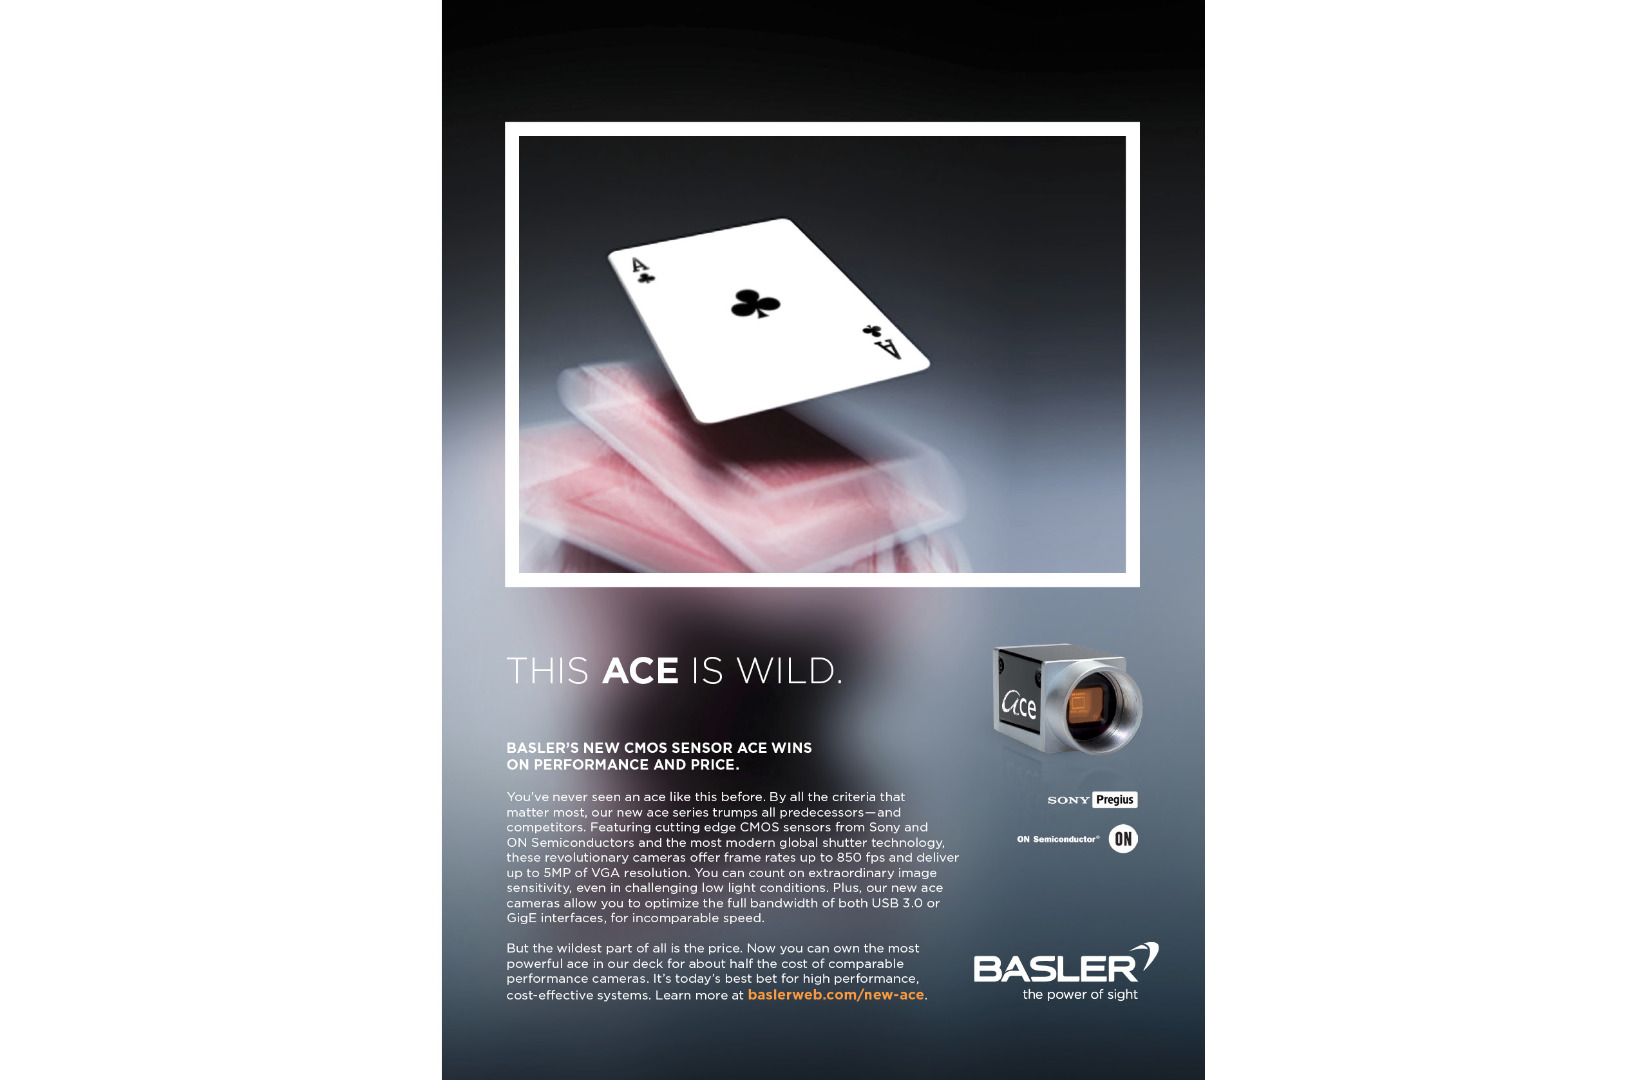 The Ace is Wild